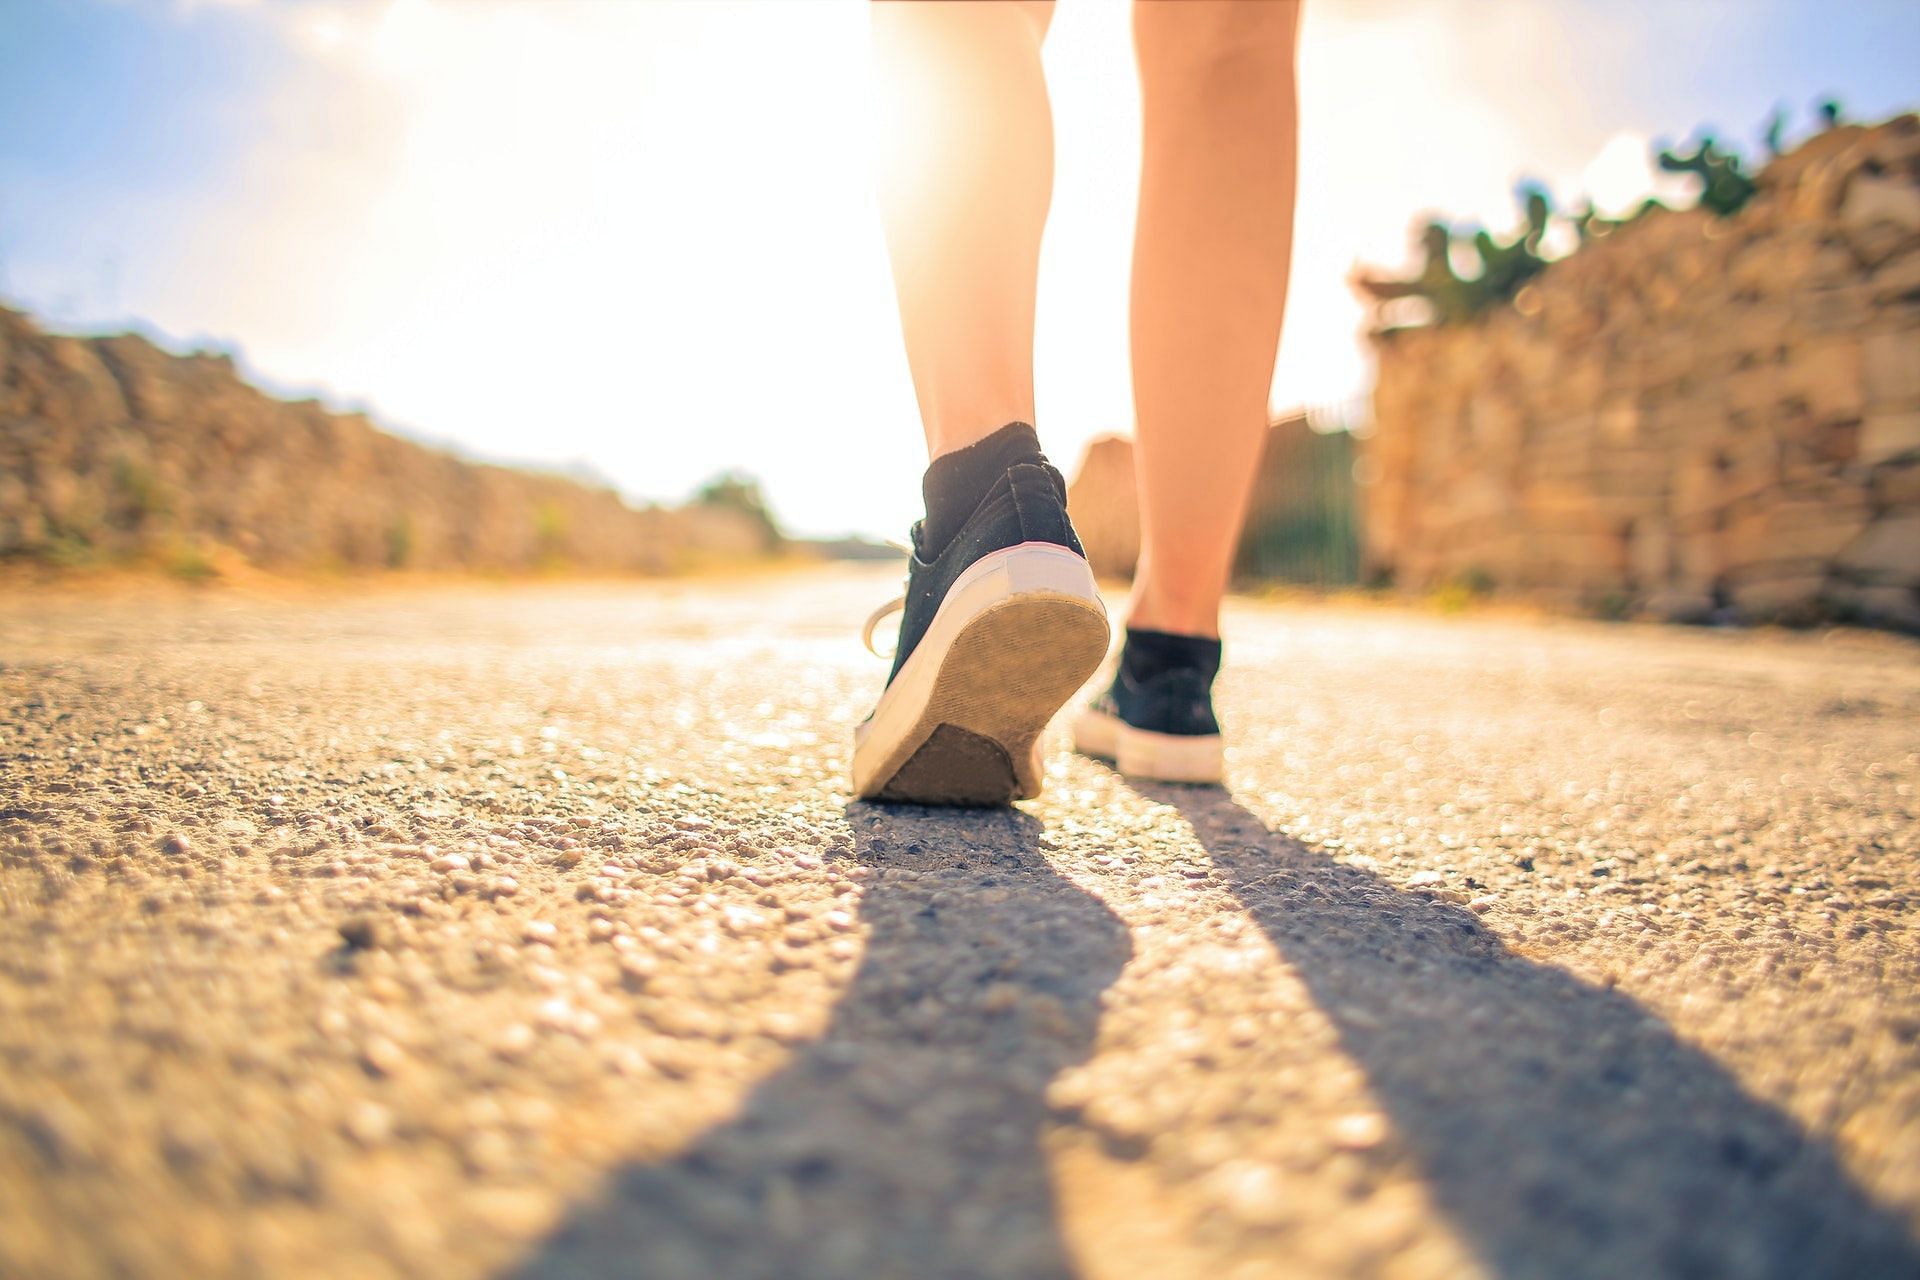 Walking is an effective way to control your blood pressure.(Photo by Andrea Piacquadio via pexels)